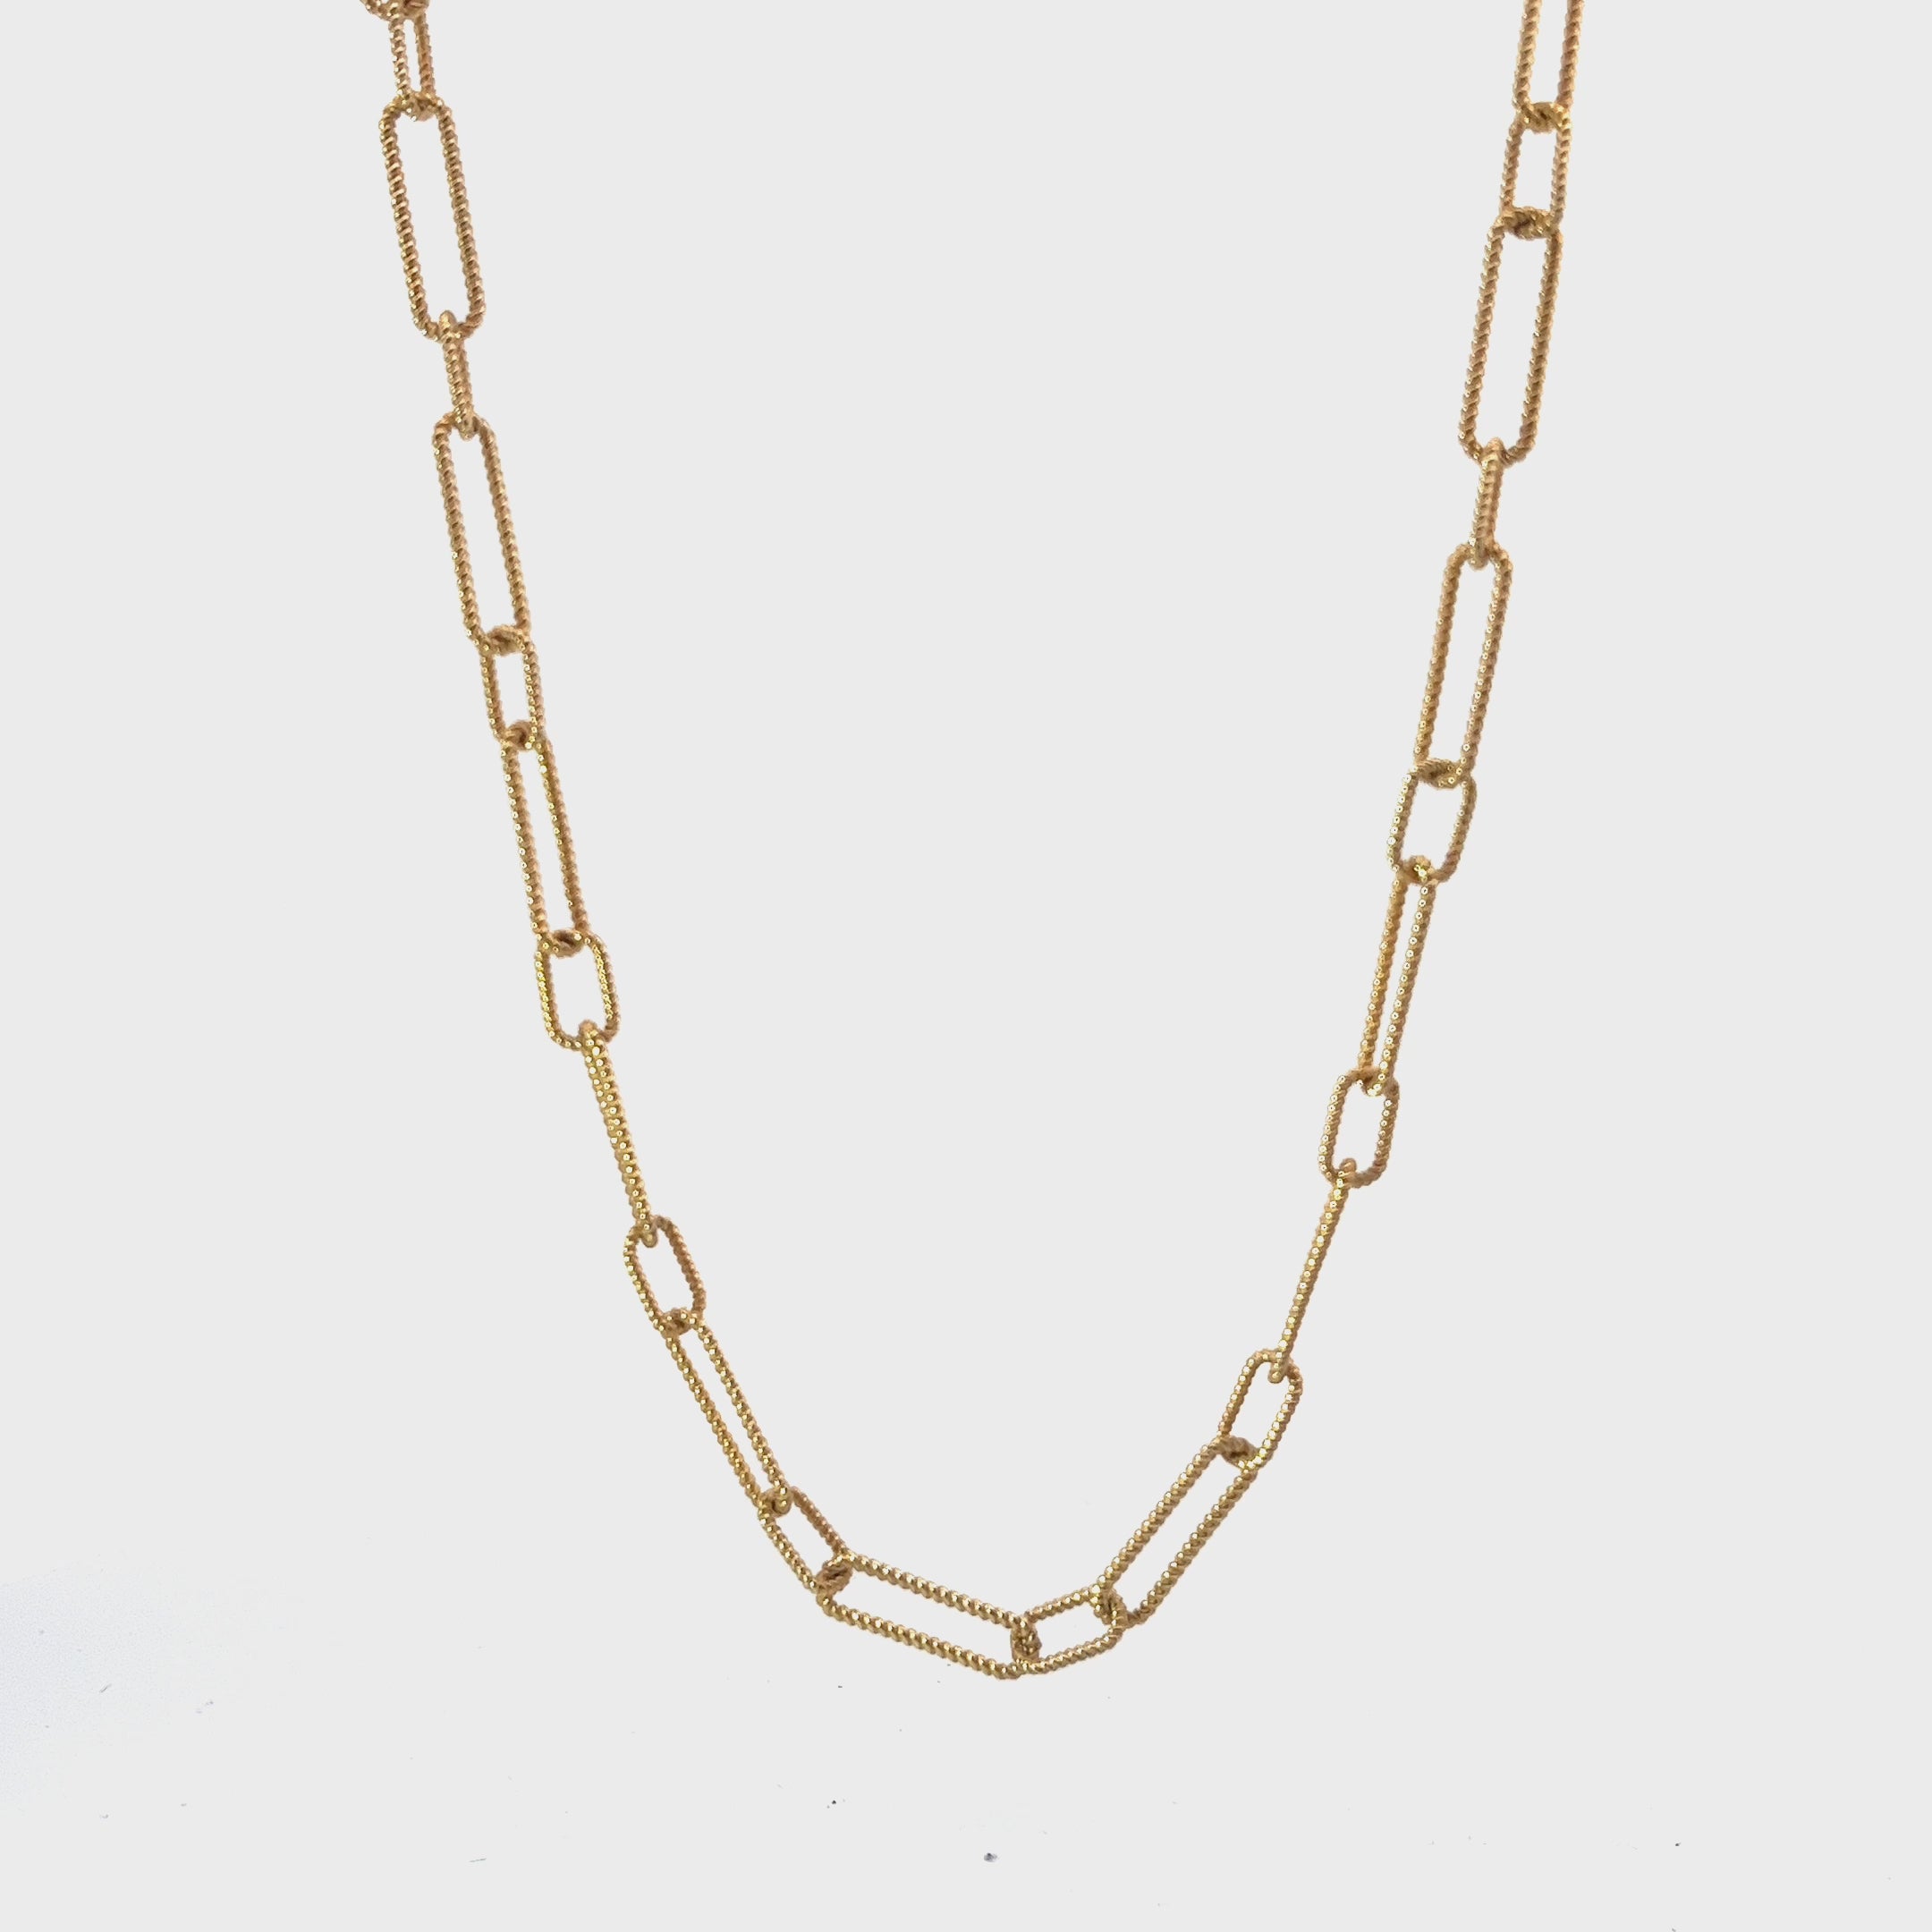 Ladies 14k gold Braided Paperclip Chain Necklace